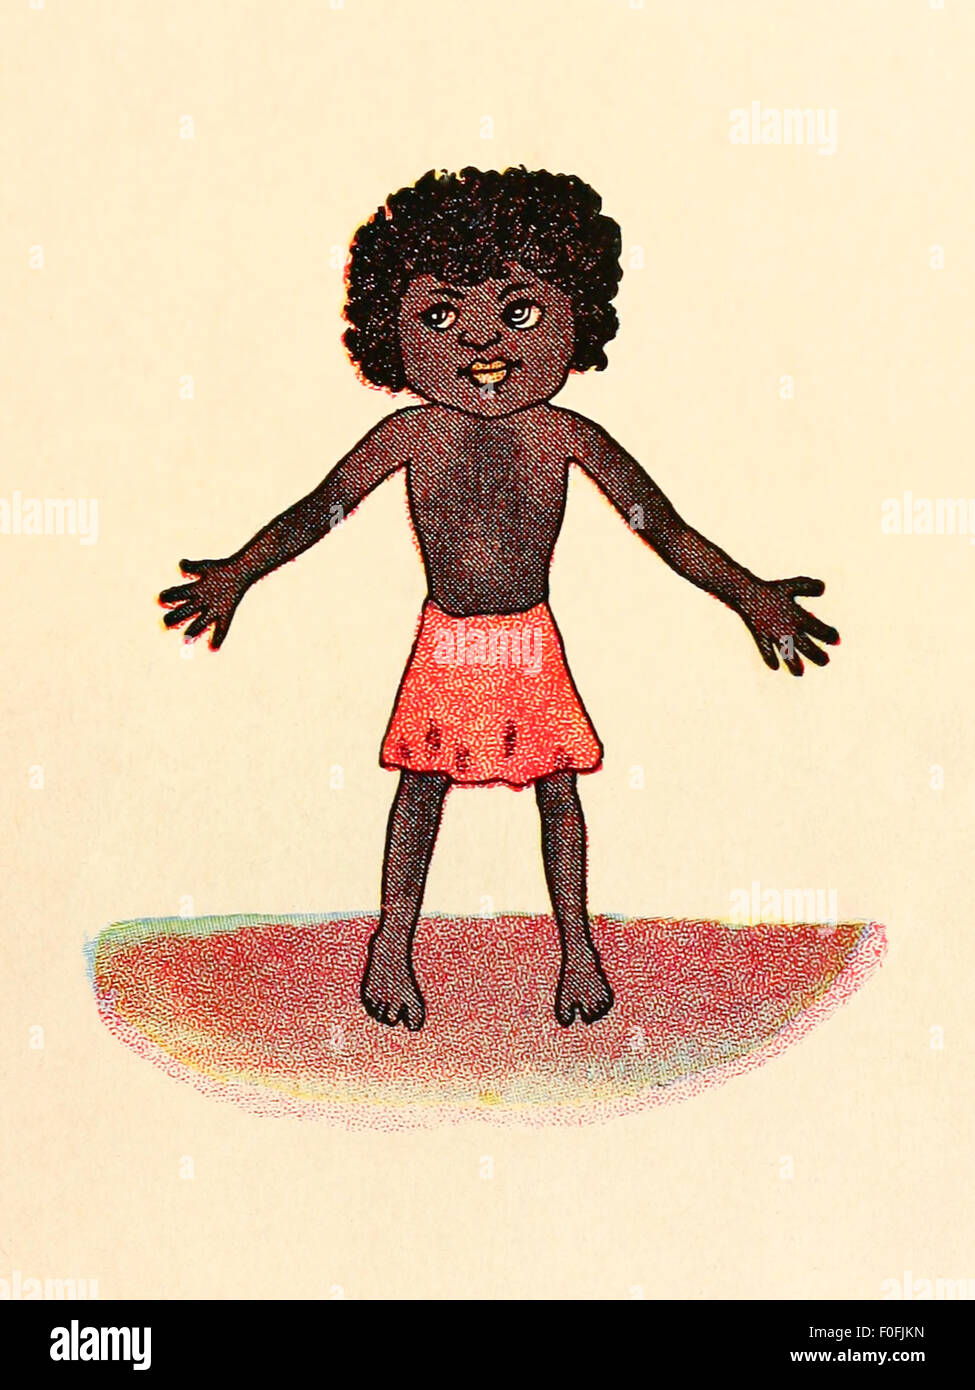 Little Black Sambo. Image from 'The Story of Little Black Sambo' by Helen Bannerman. See description for more information. Stock Photo